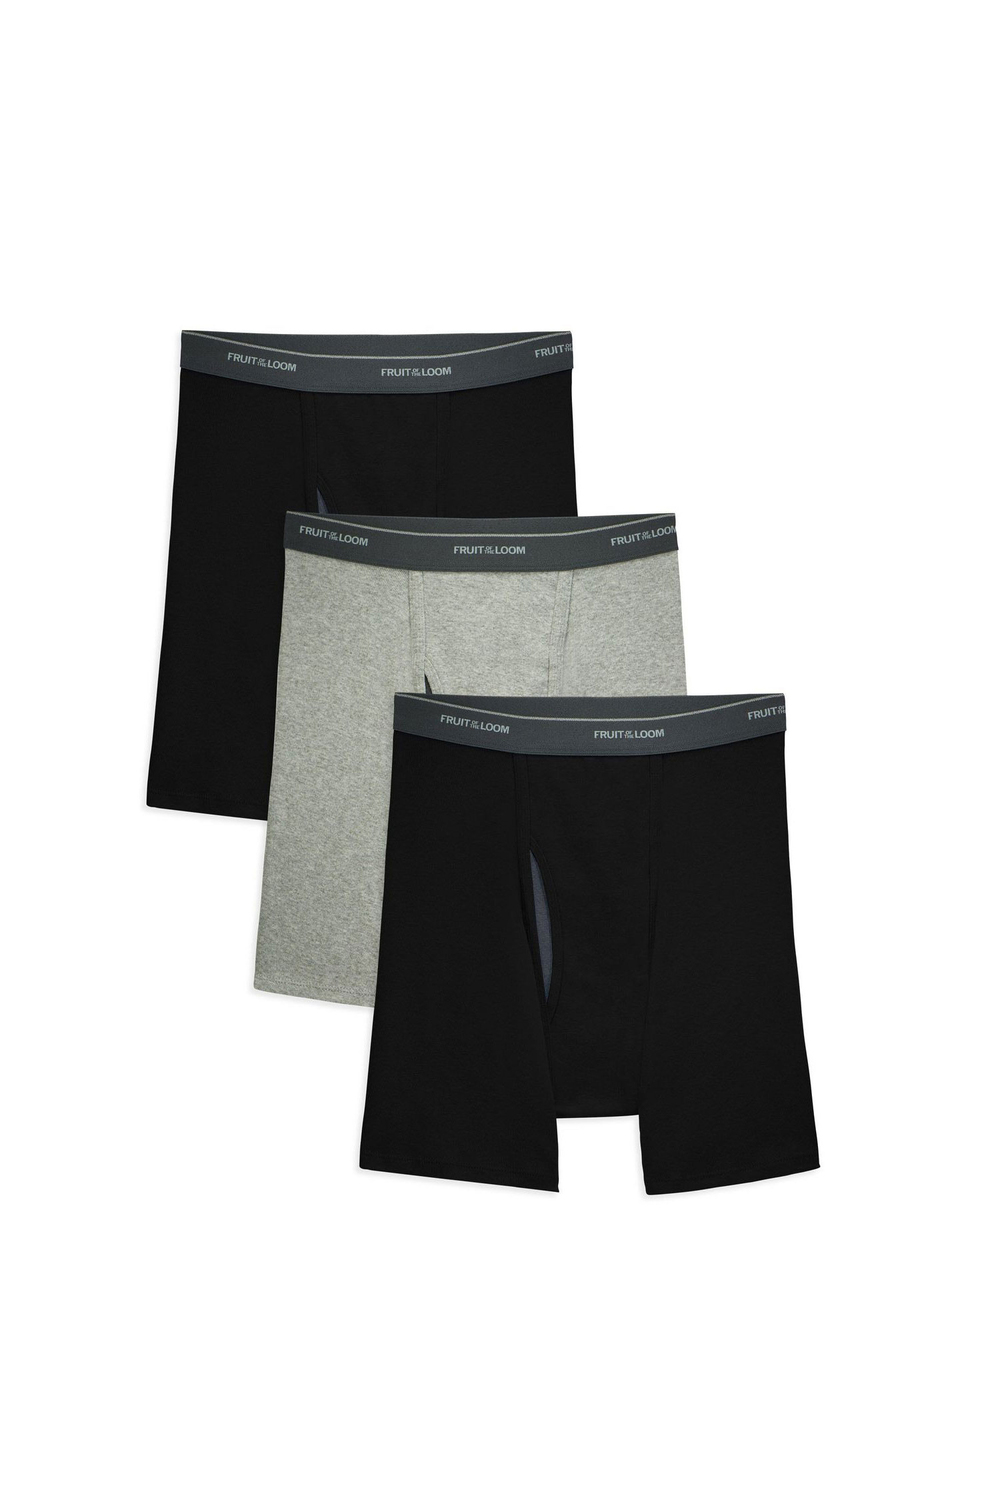 Buy FRUIT OF THE LOOM Men's Black Solid Cotton Briefs Online at